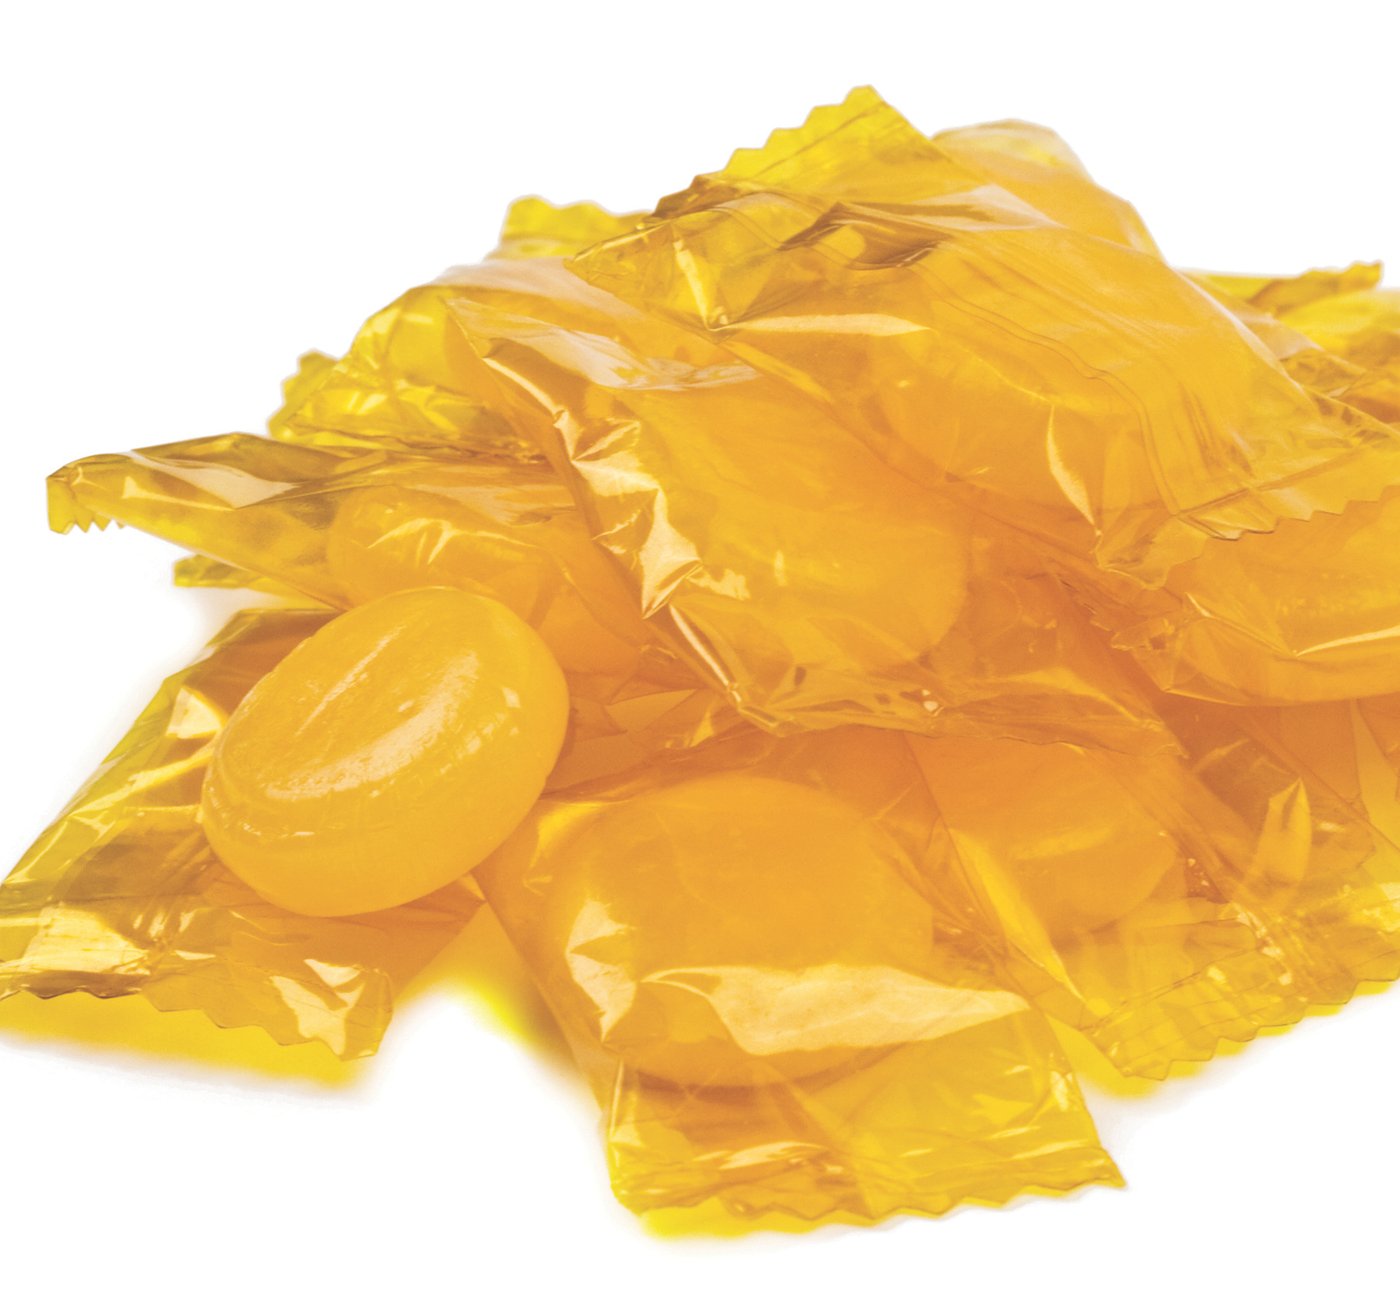 Butterscotch Candy - Hard Candy - Chocolates & Sweets - Nuts.com